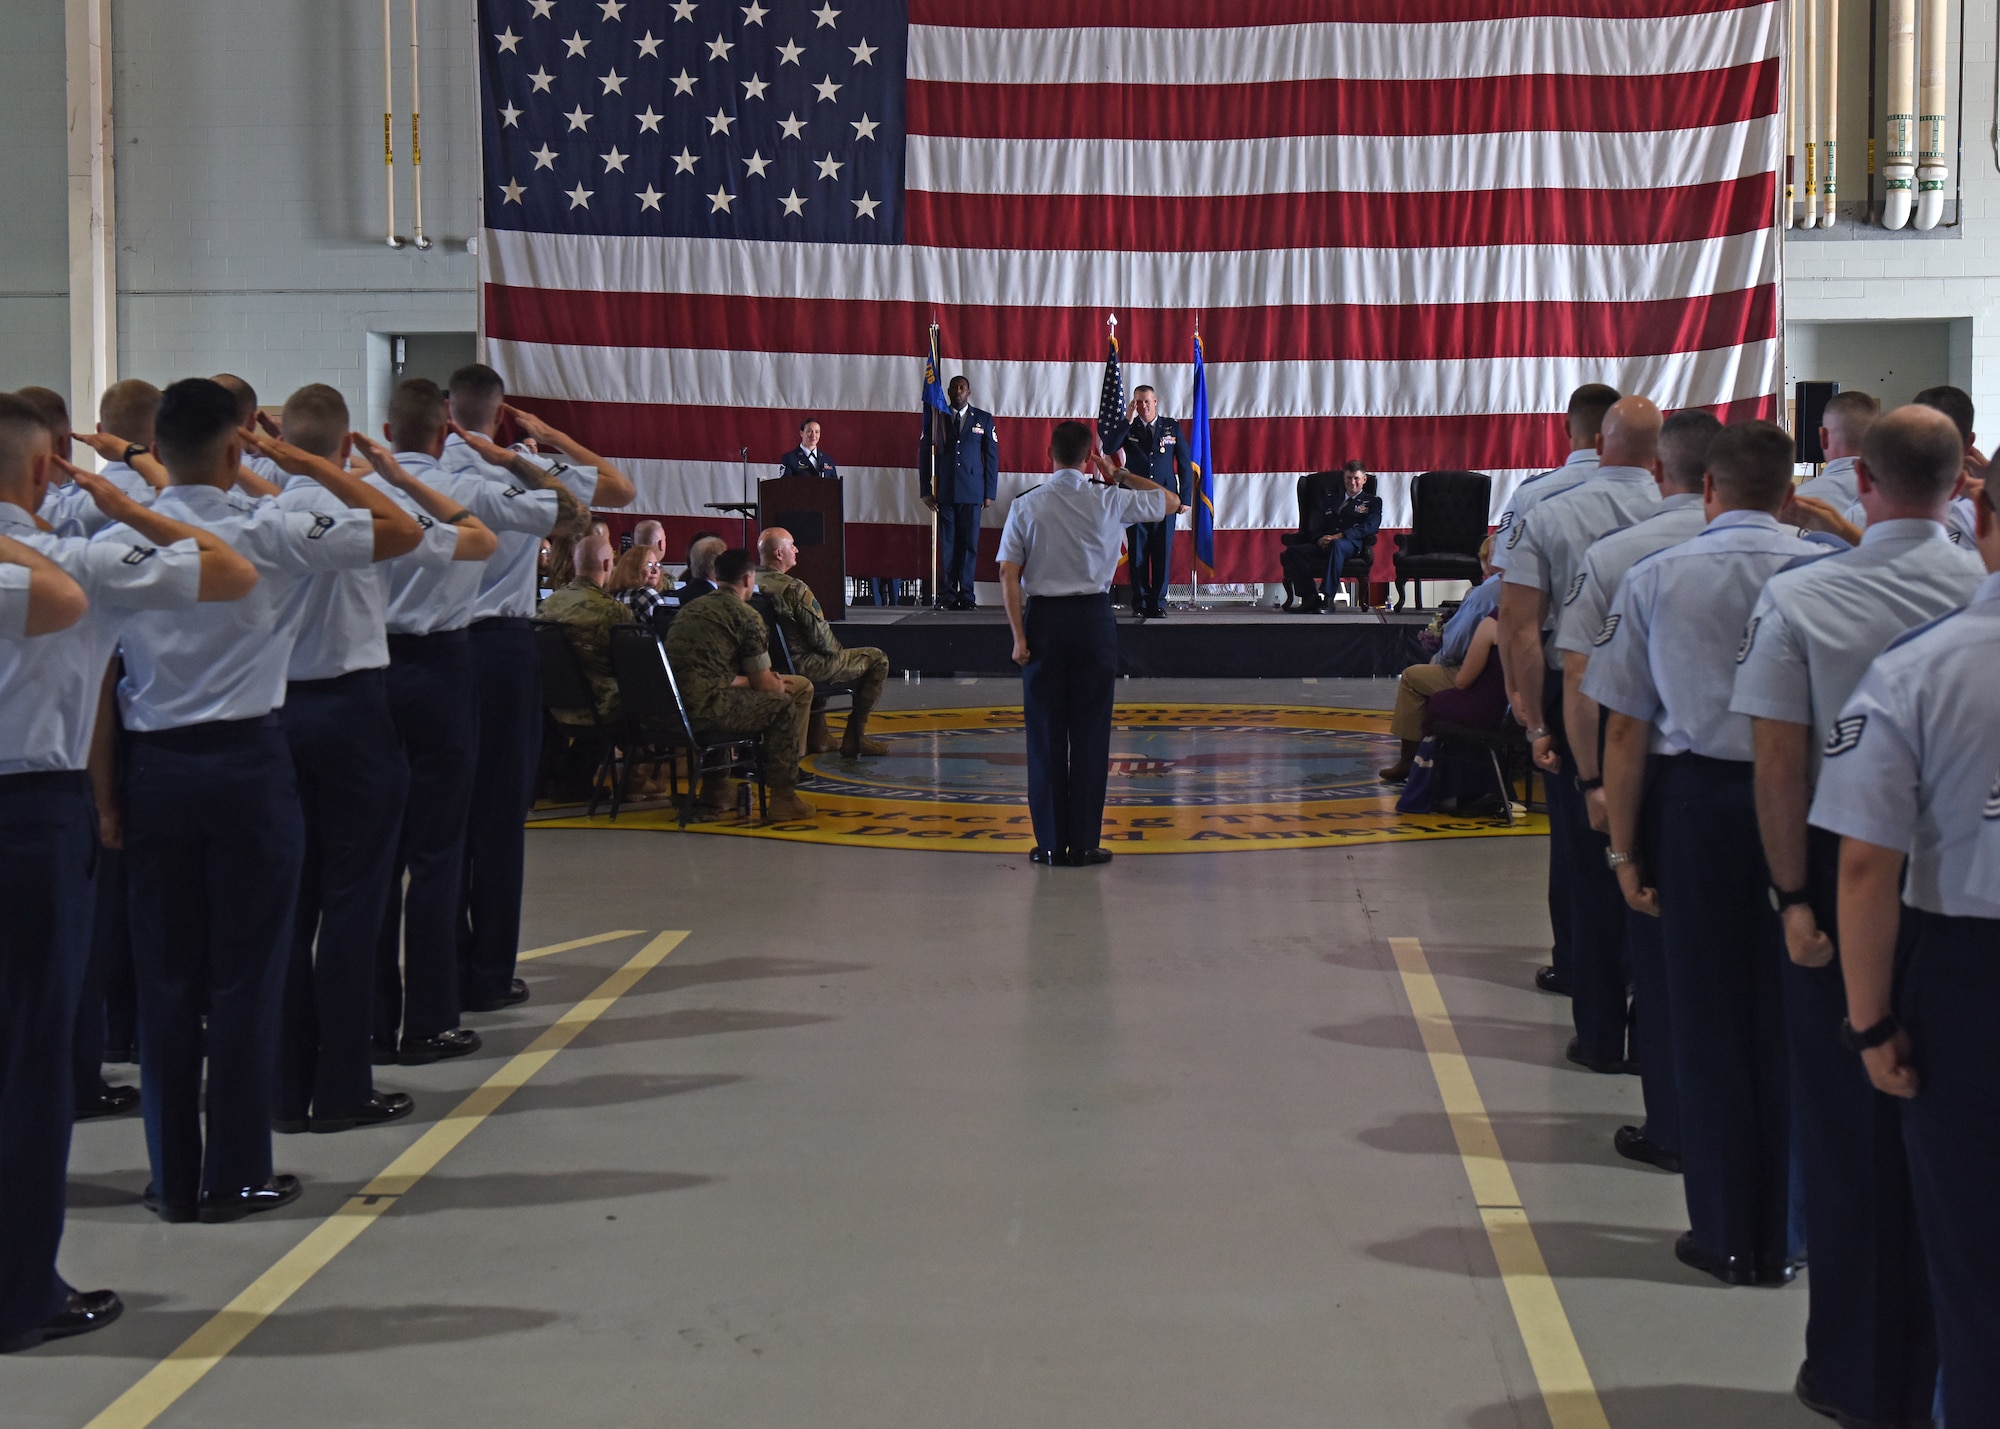 U.S. Air Force Lt. Col. Robert Kammerer, 316th Training Squadron outgoing commander, salutes members from the 316th TRS one last time during the change of command ceremony at the Louis F. Garland Department of Defense Fire Academy High Bay on Goodfellow Air Force Base, Texas, June 21, 2019. Permanent party and students came out to show their support and thank Kammerer for his time as commander. (U.S. Air Force photo by Airman 1st Class Zachary Chapman/Released)